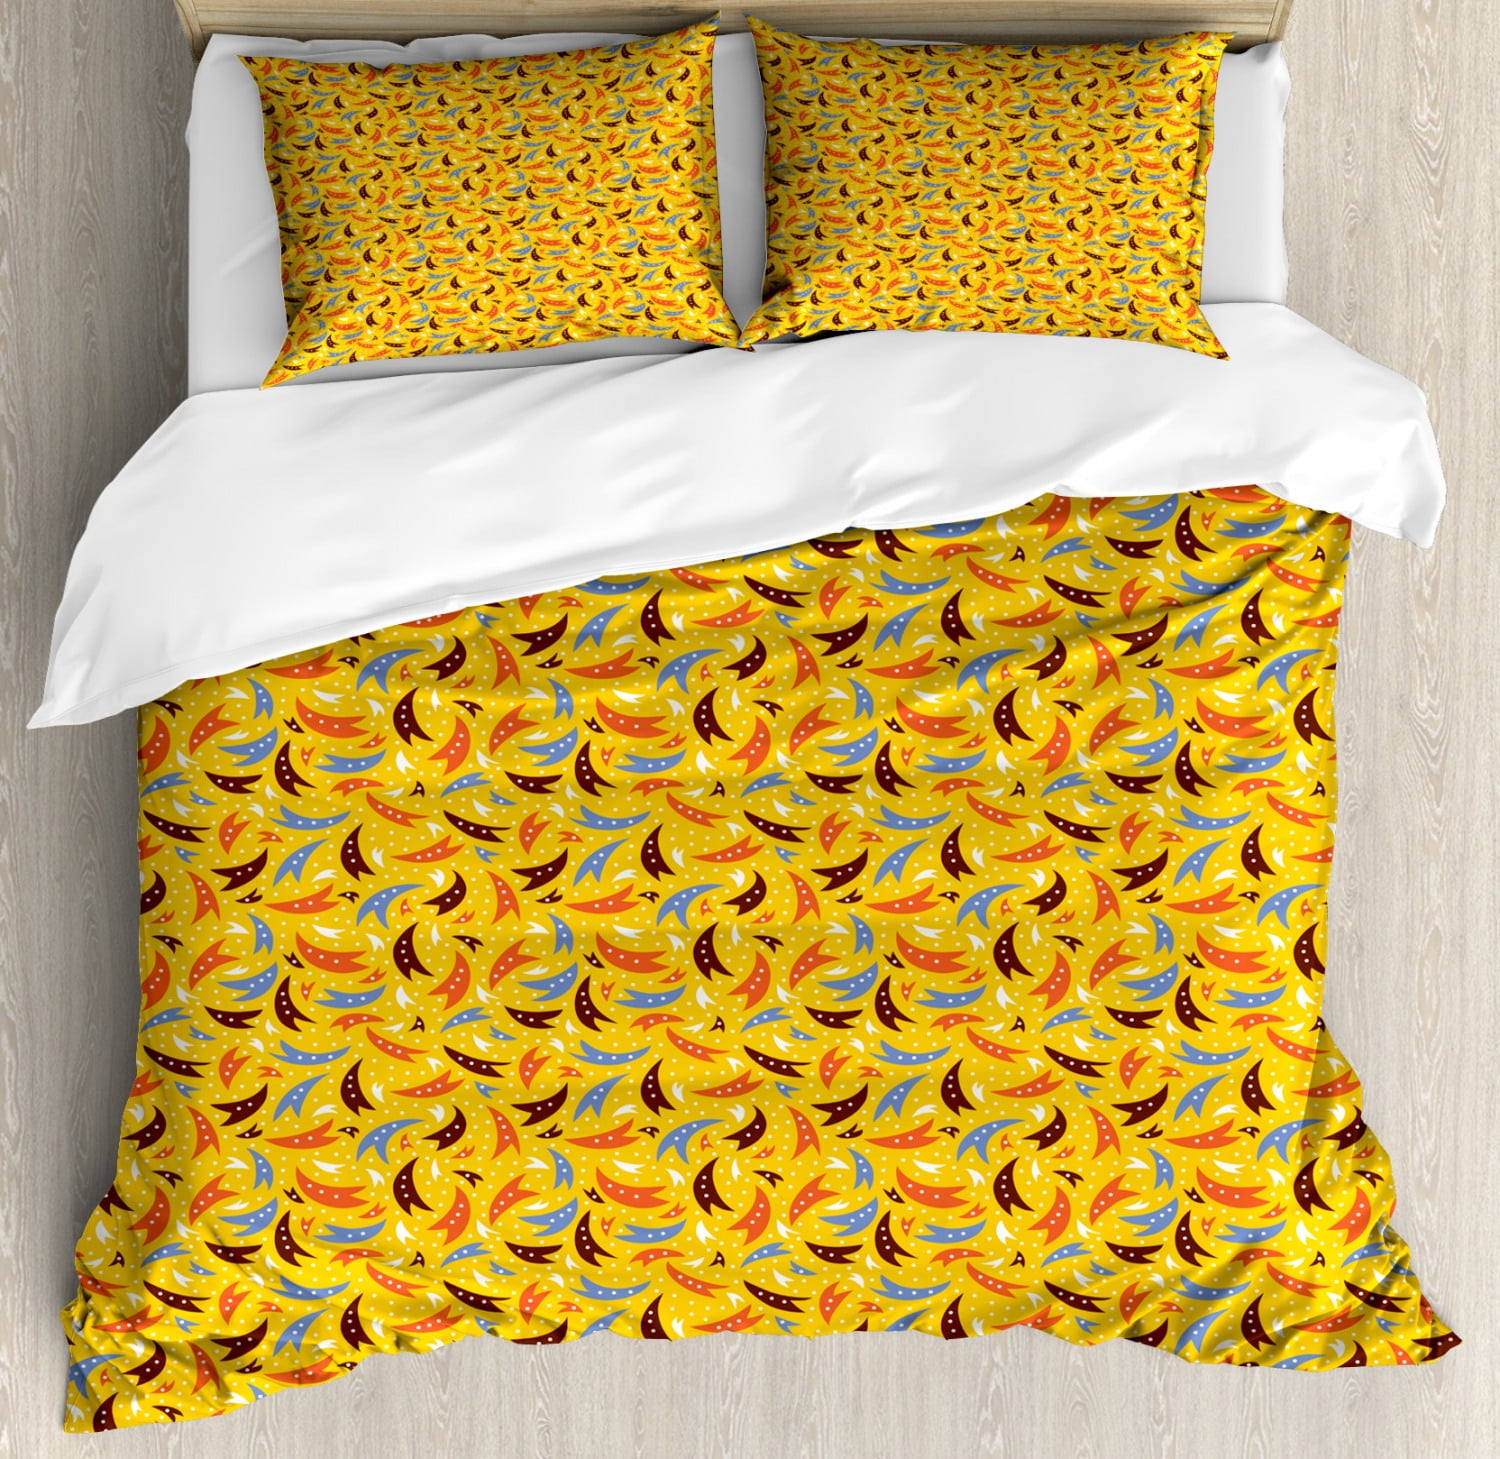 Colorful Duvet Cover Set King Size Abstract Tails Doodle Pattern